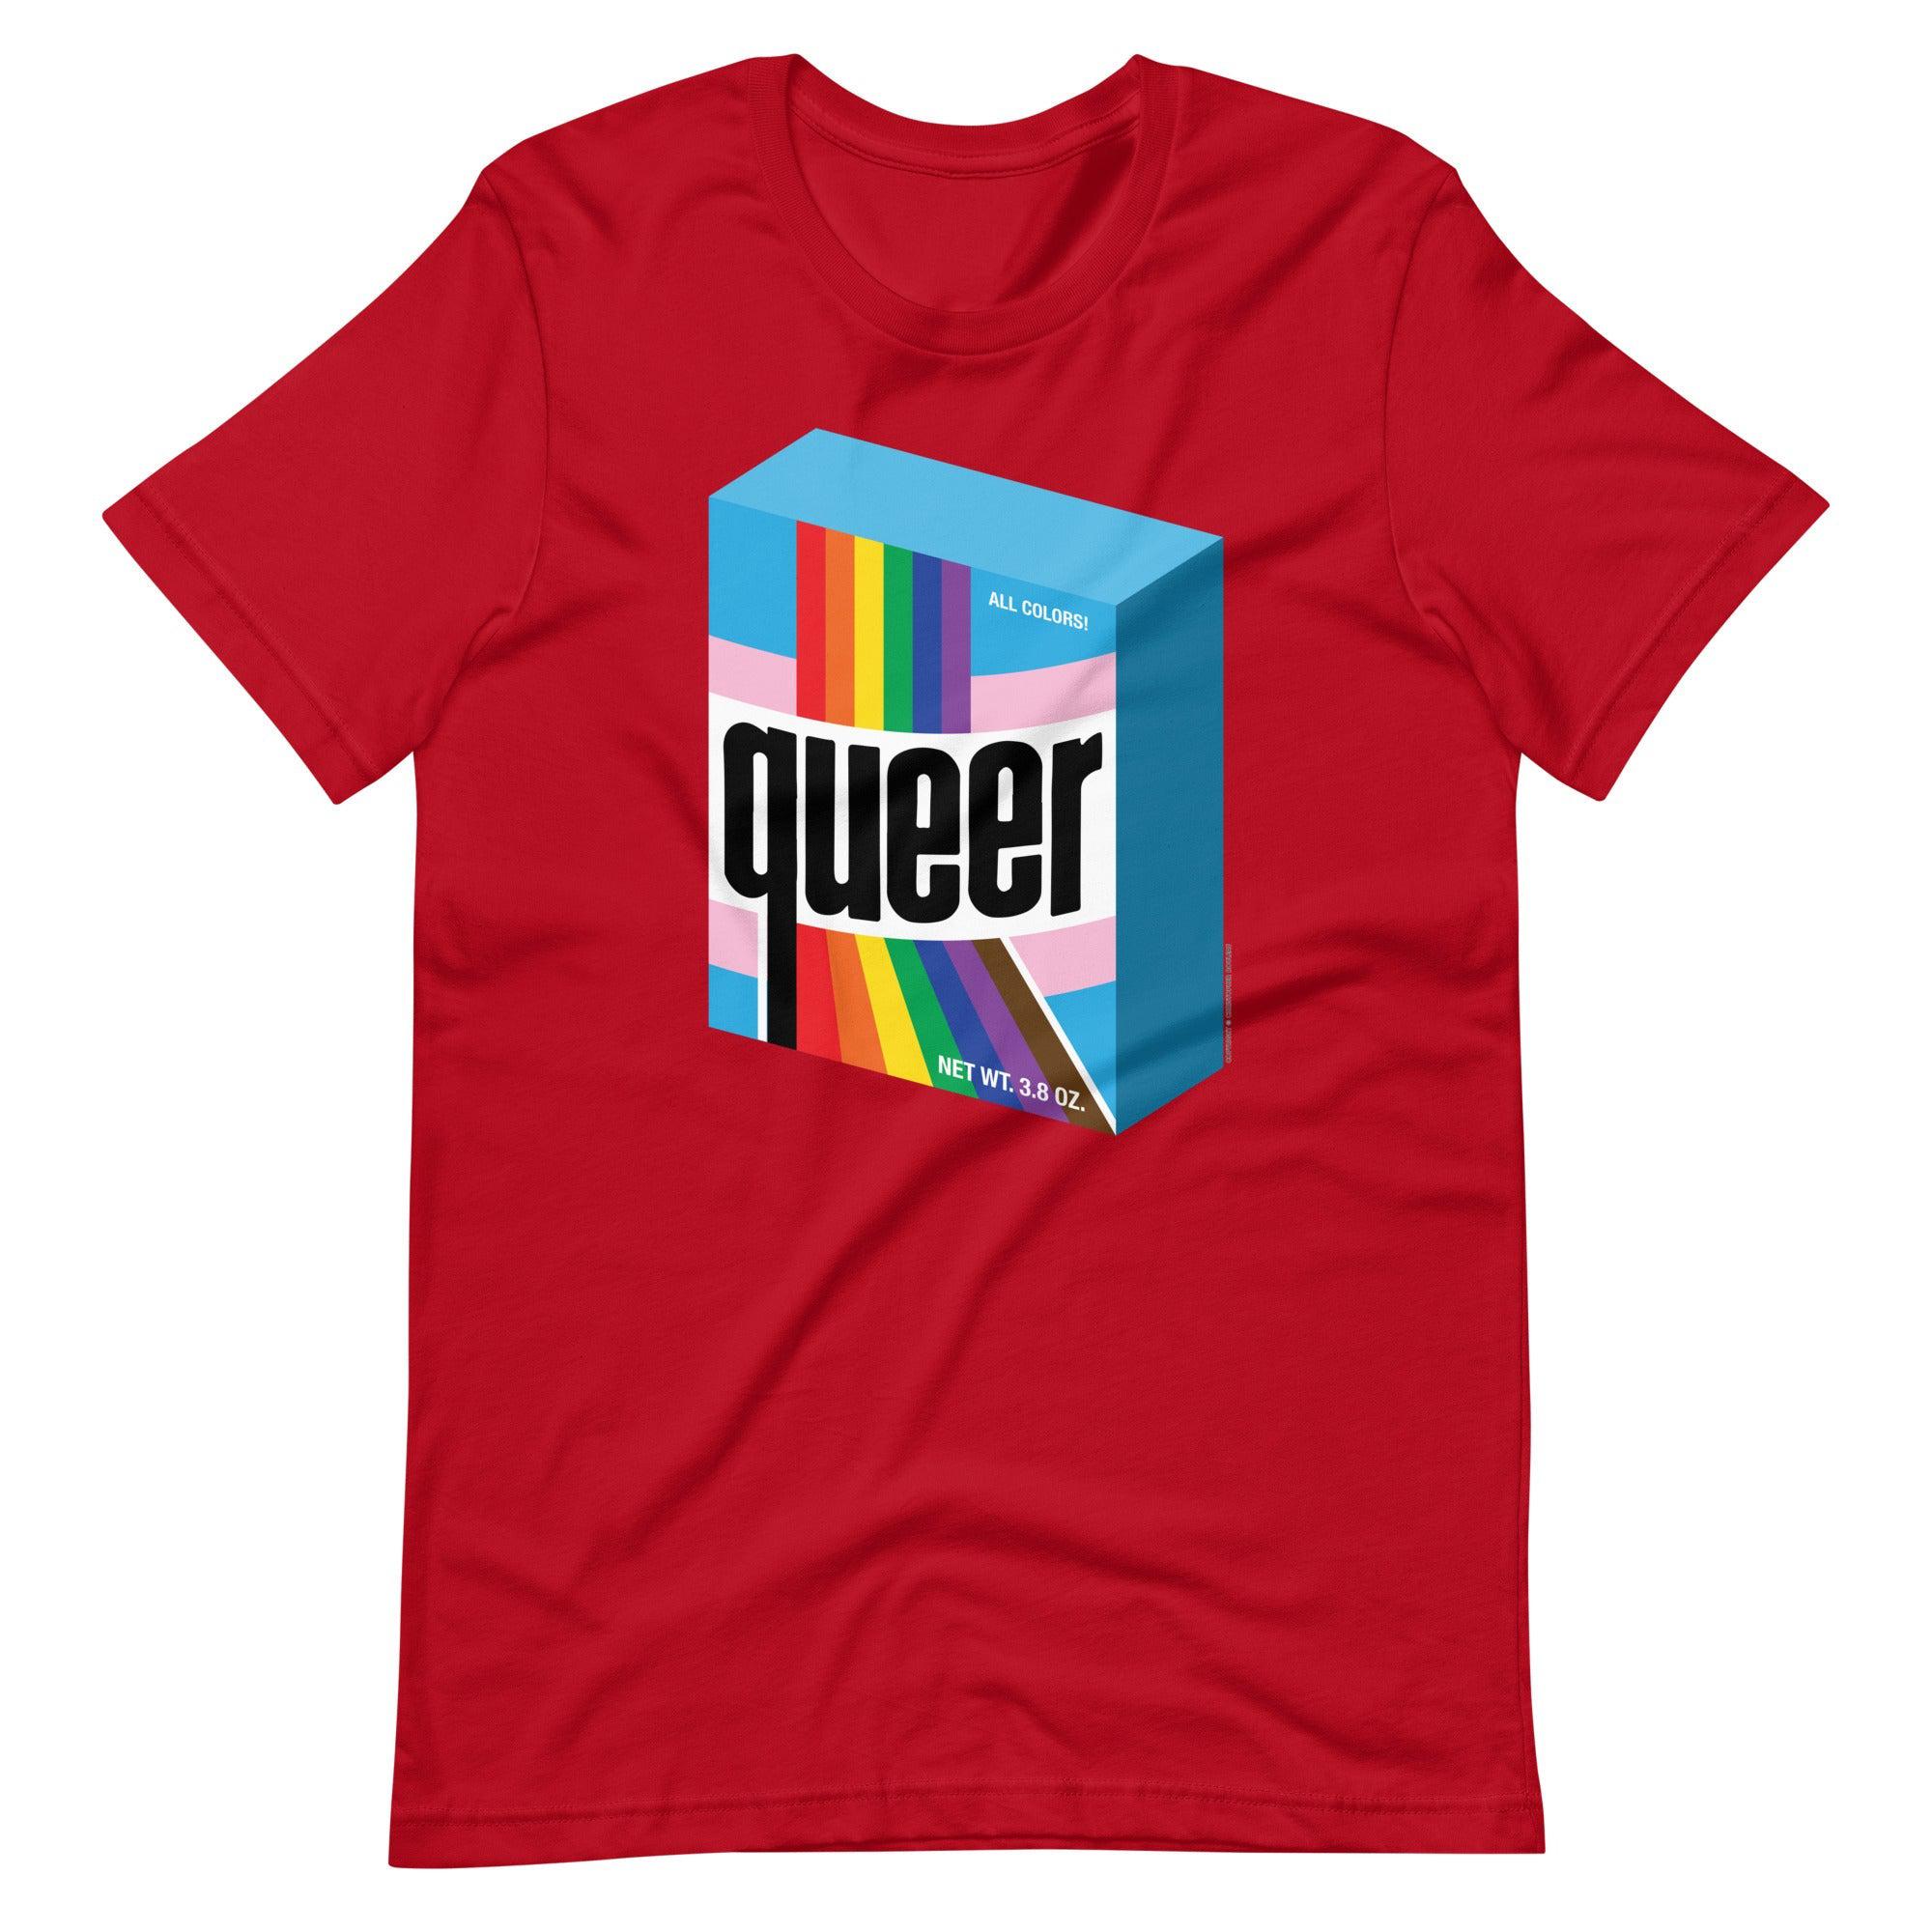 ULTRA QUEER - DealByEthan.gay